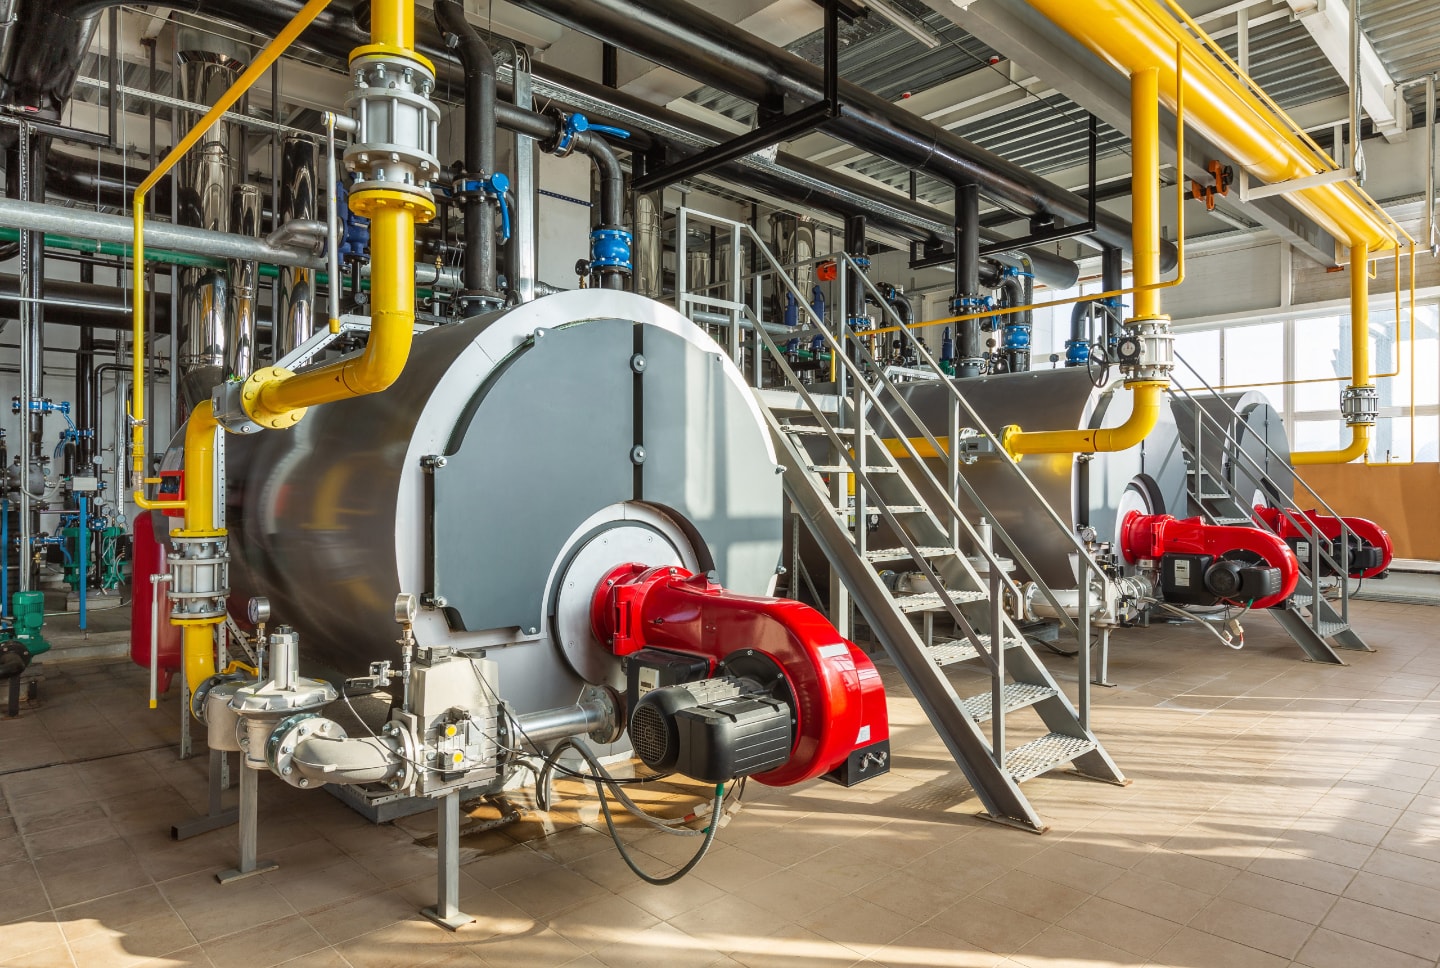 The interior of an industrial boiler room with three large boilers, many pipes, valves and sensors.